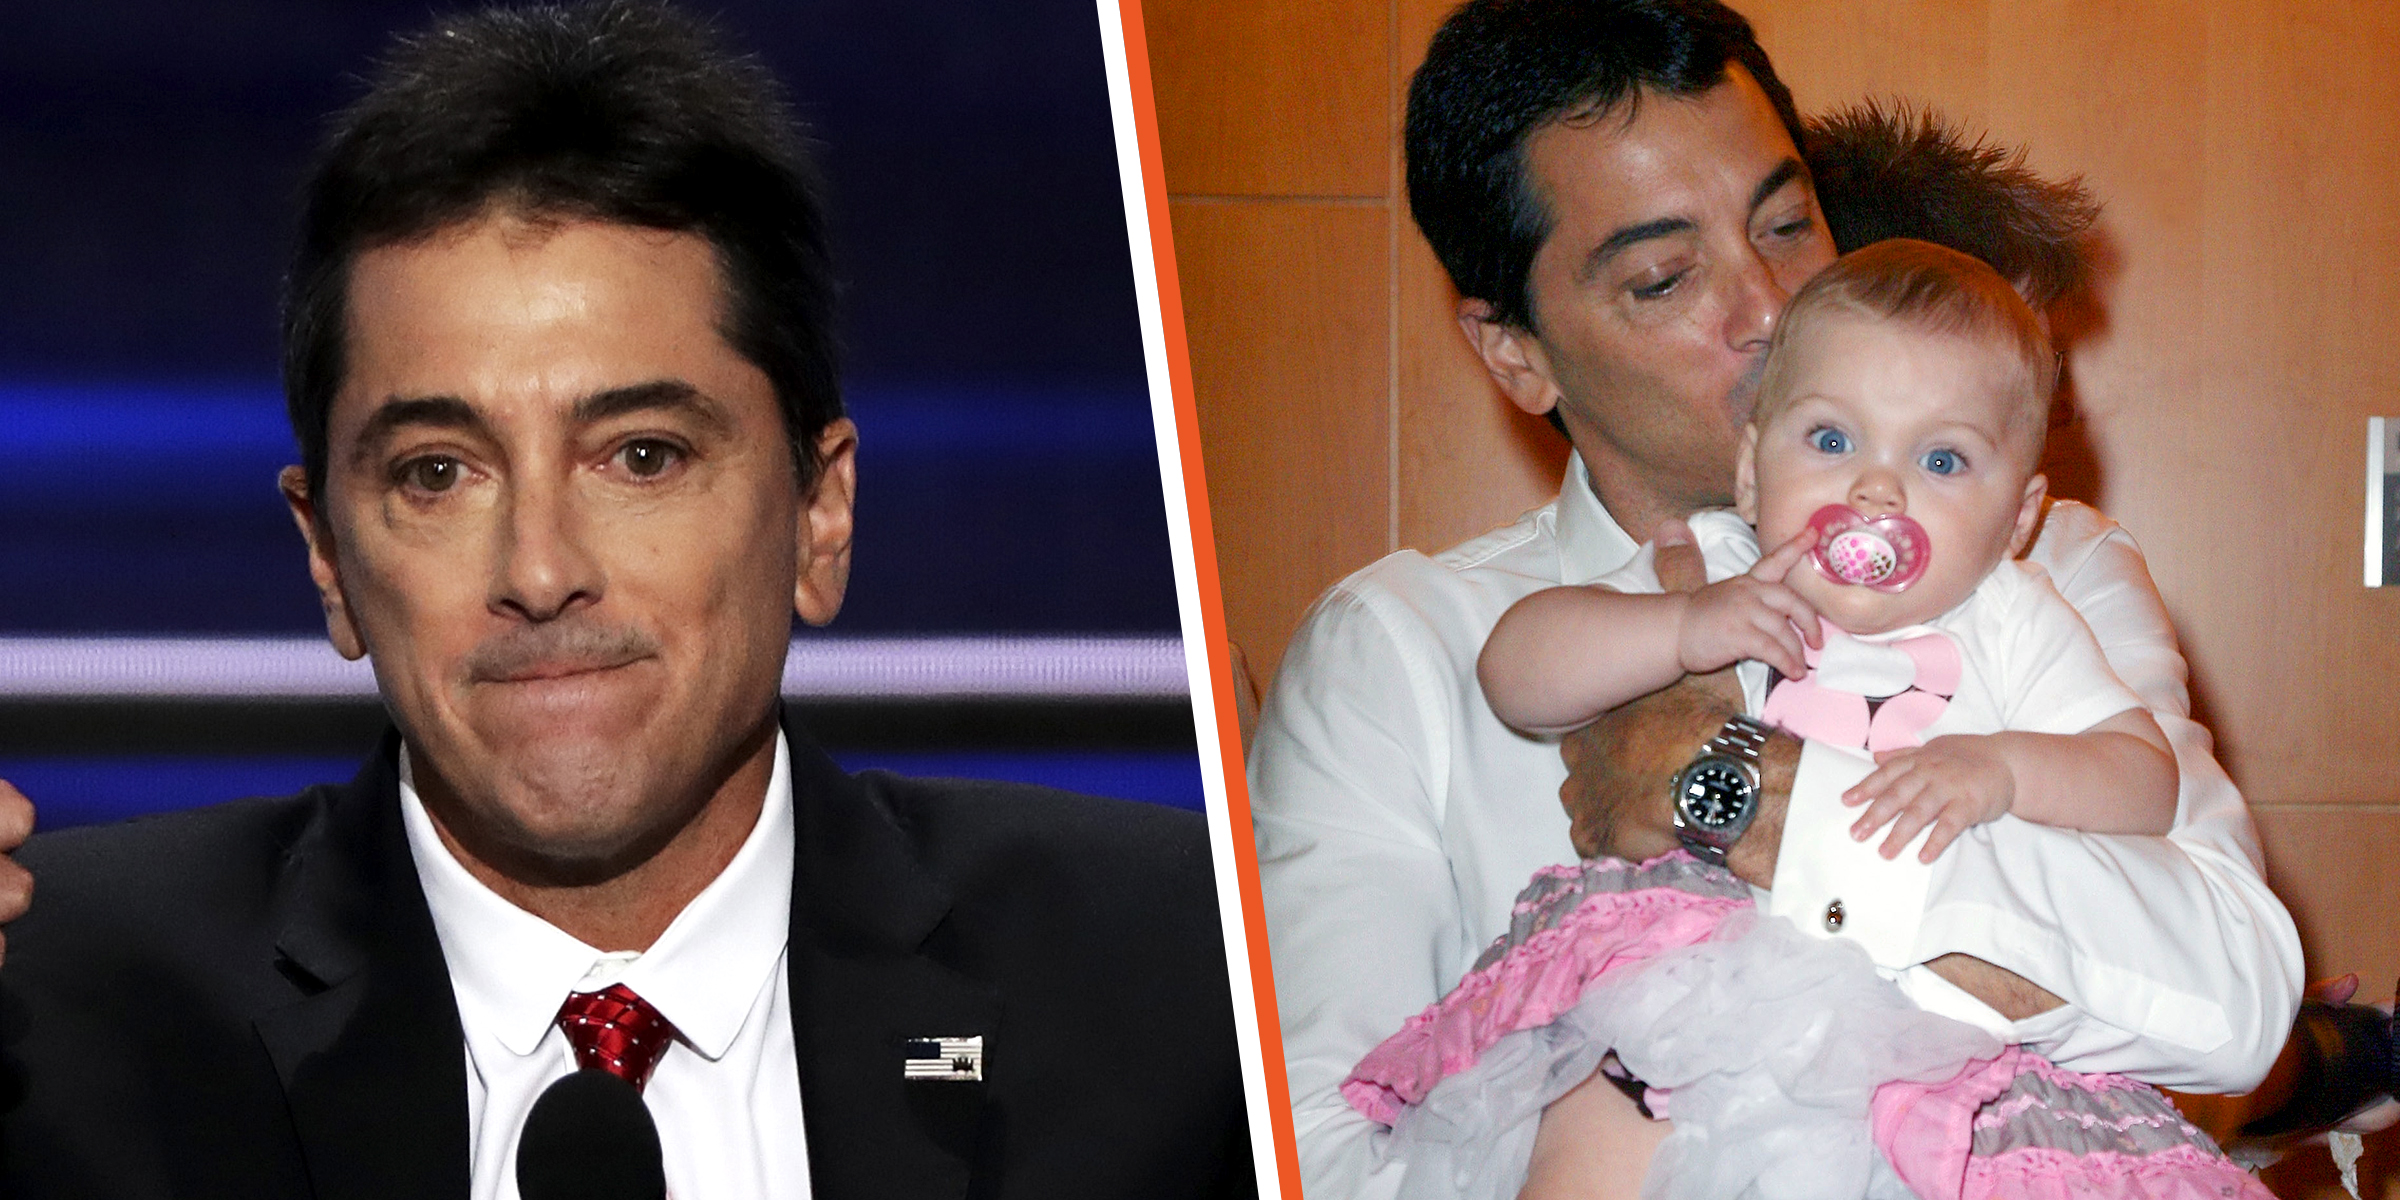 Scott Baio | Scott Baio and his daughter Bailey | Source: Getty Images